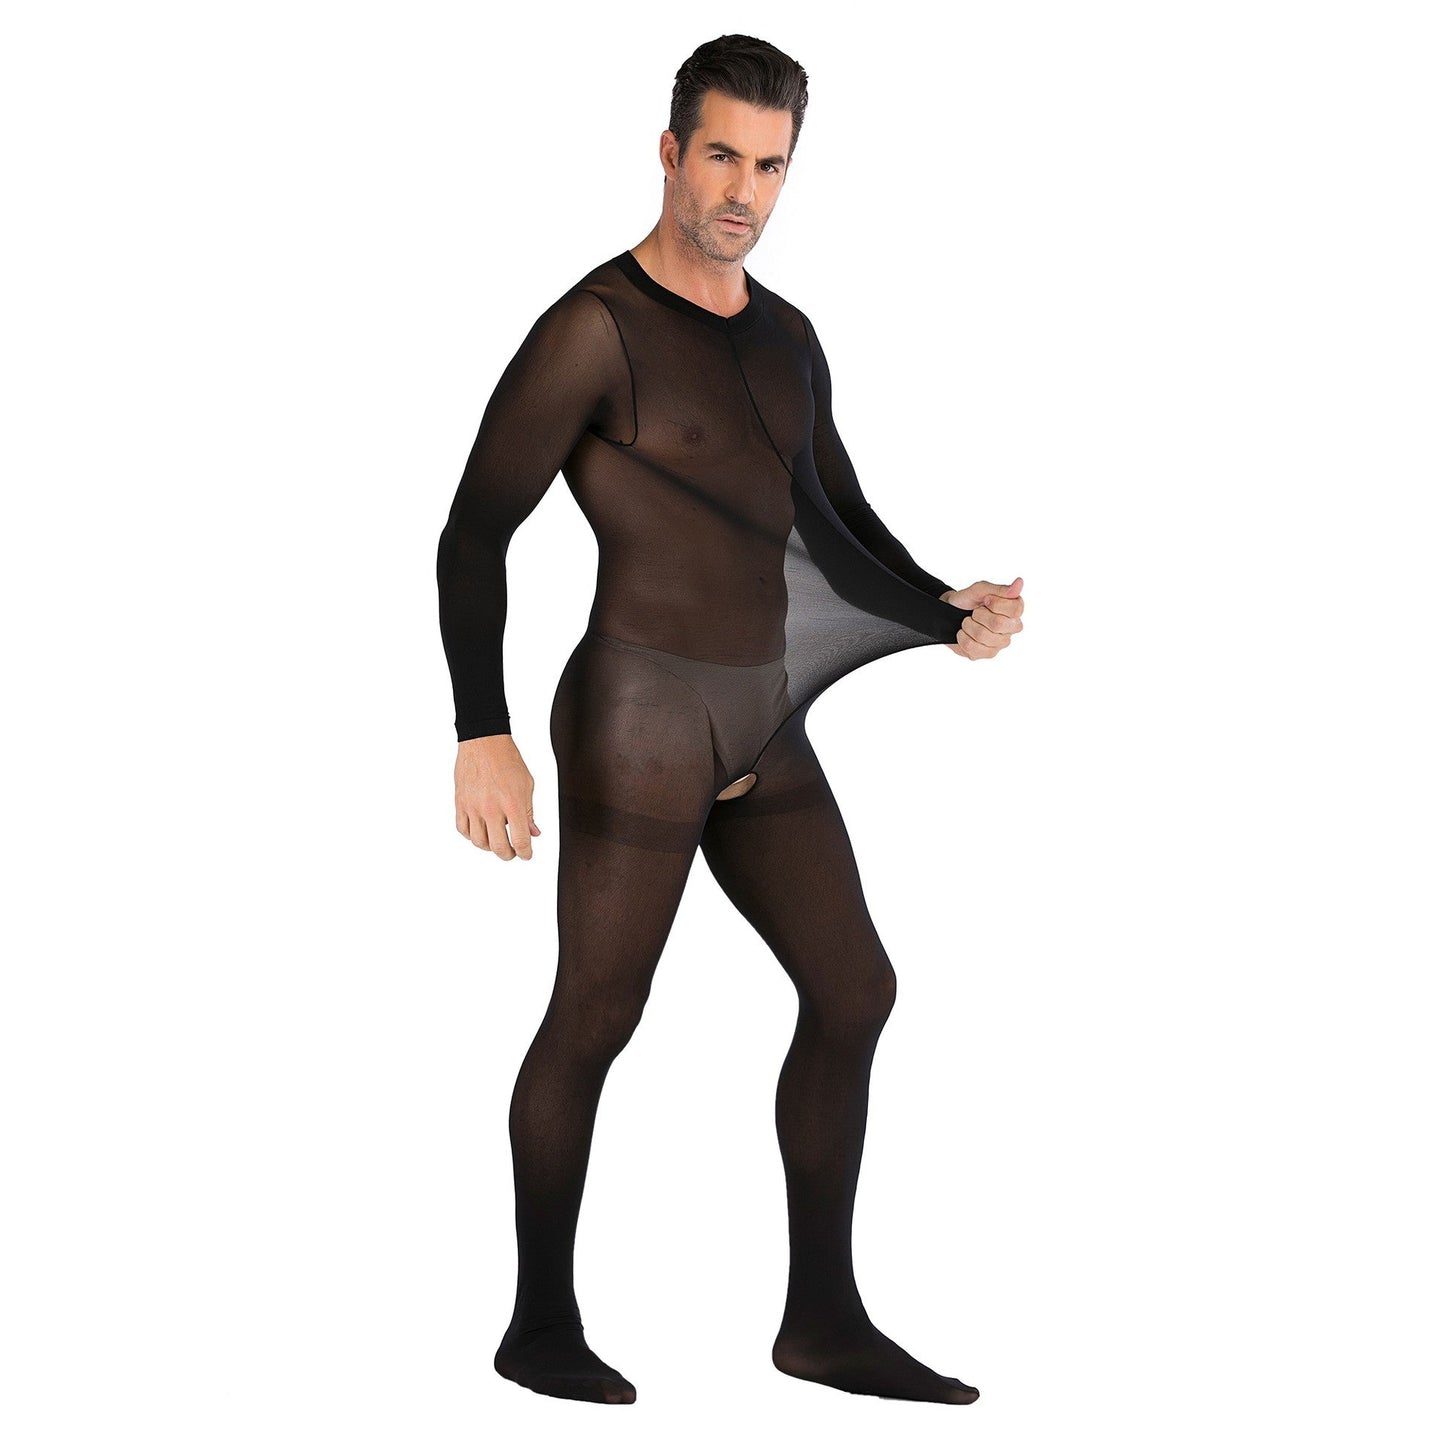 Men's One-piece Silk Stockings with Long Sleeves Open - lovemesexRainbowme Body Stocking